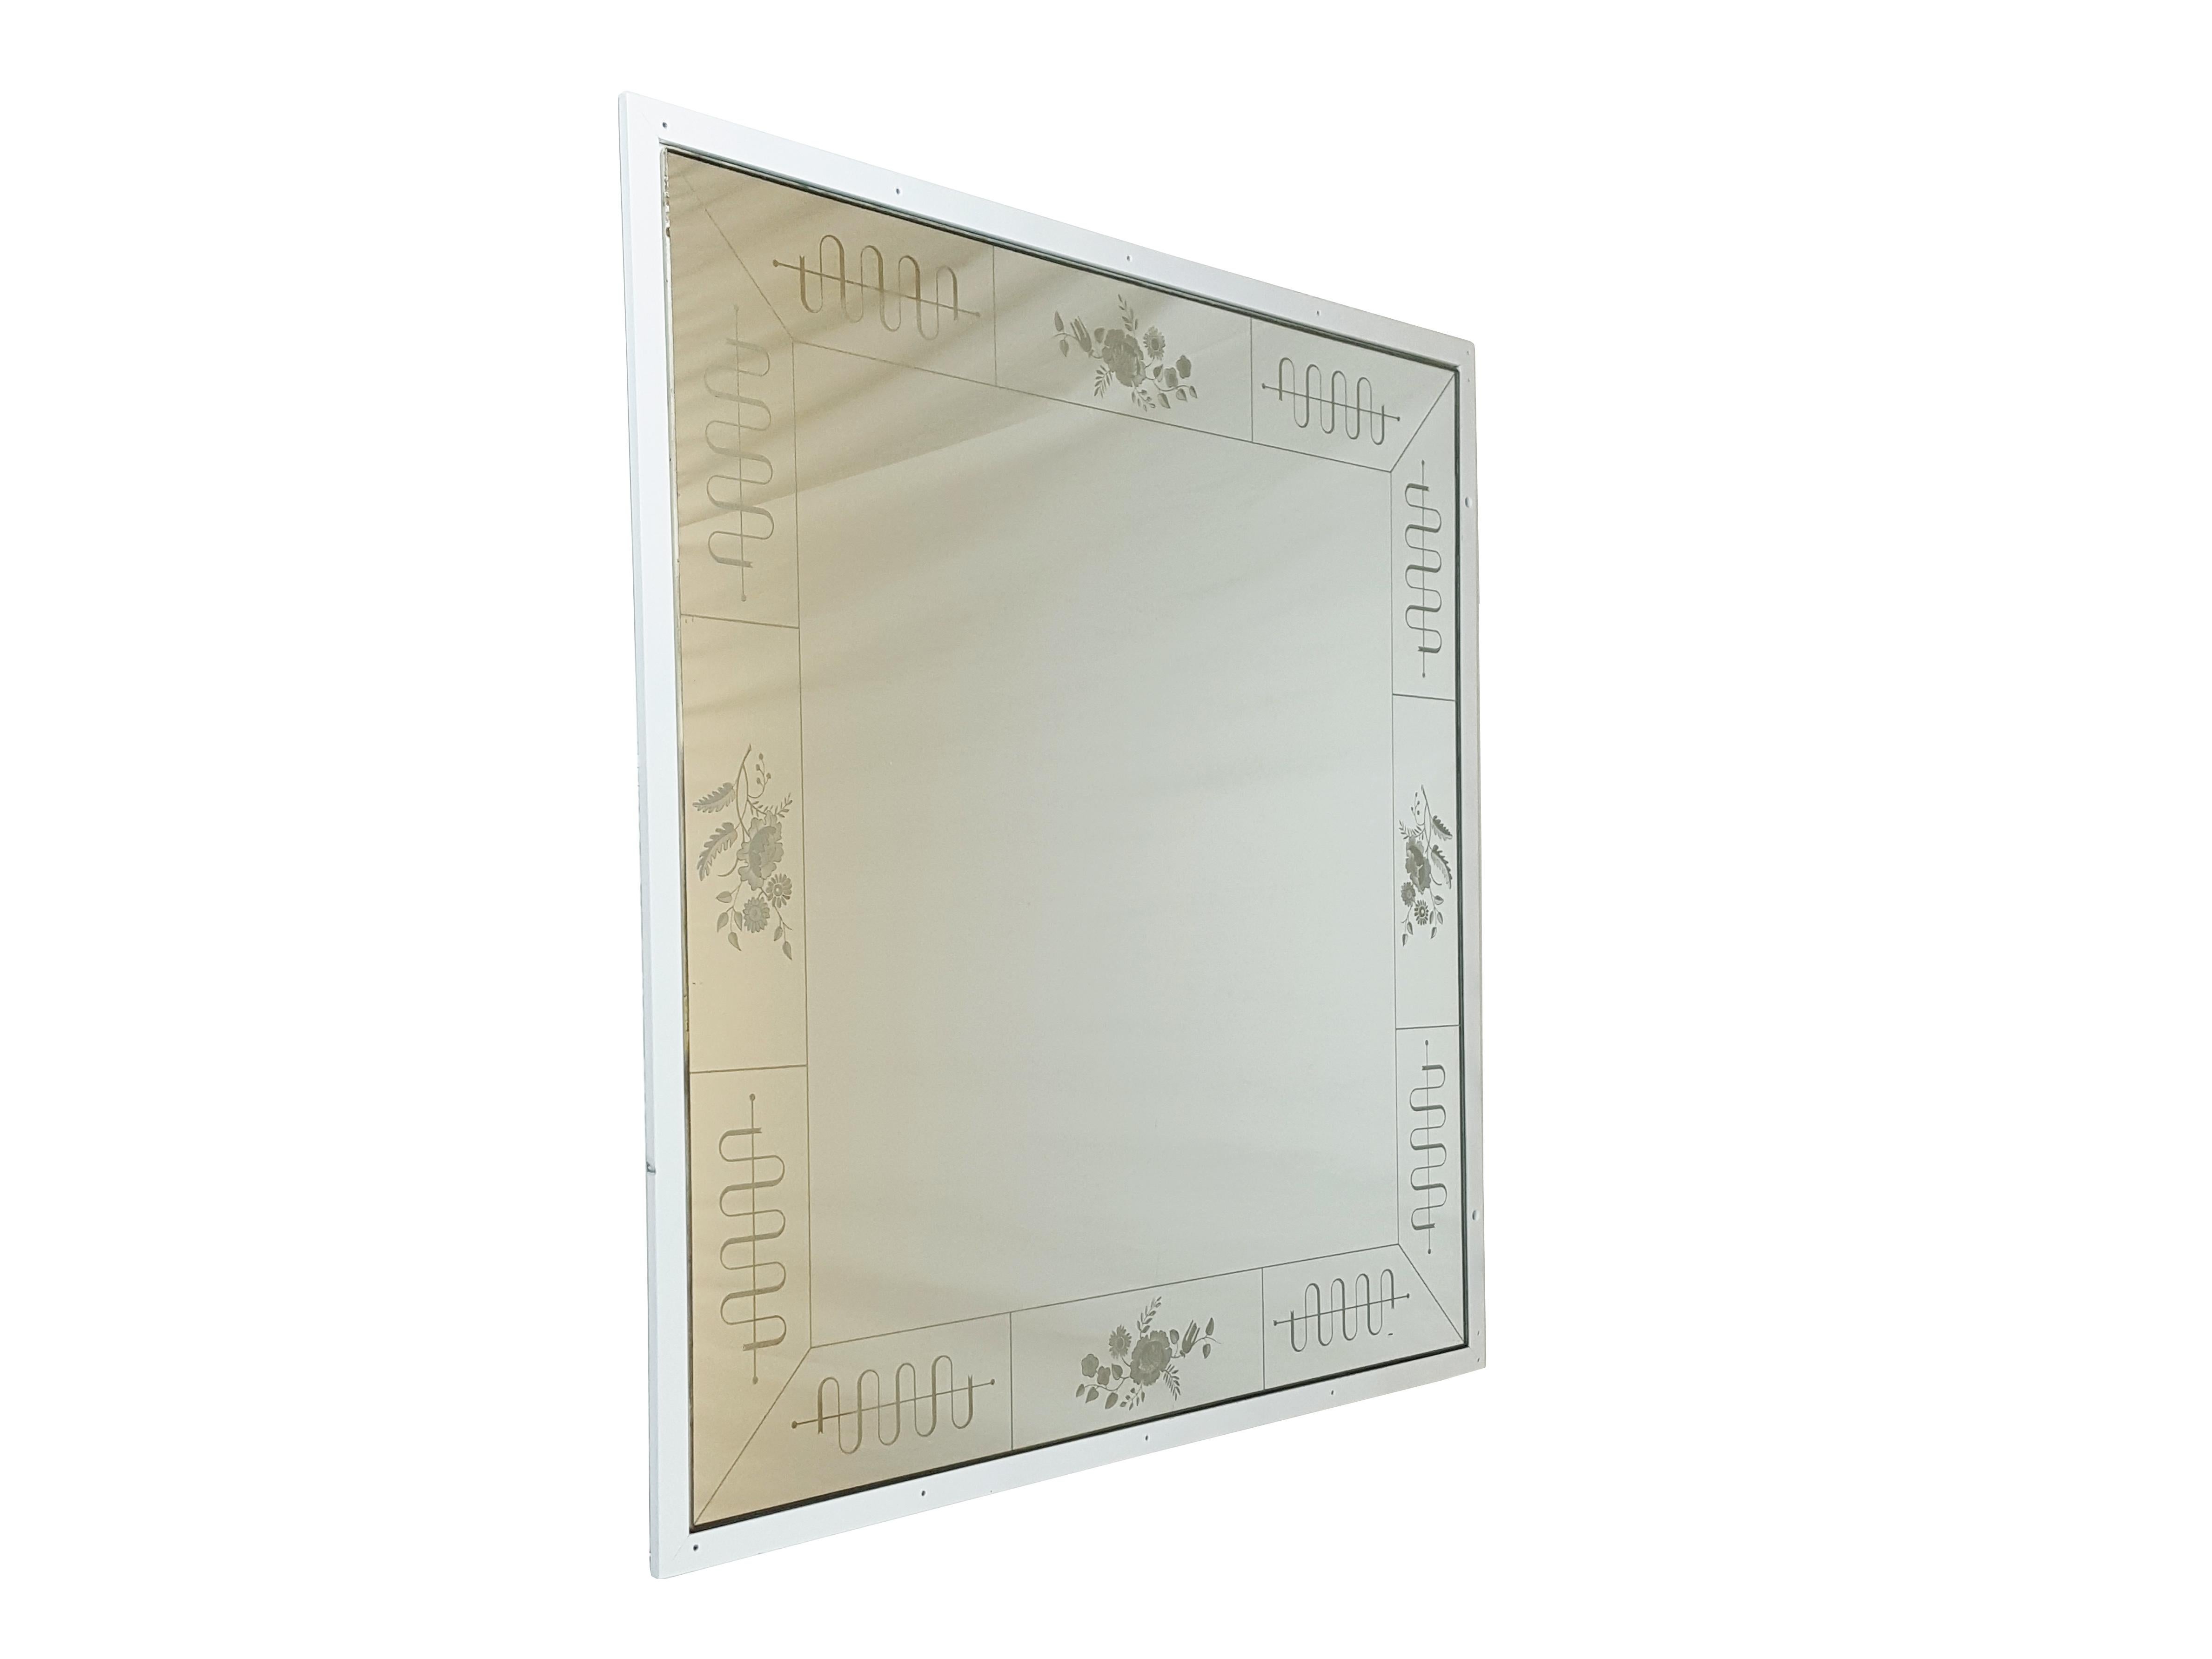 This amazing wall mirror was manufactured by the famous Italian Brusotti glassworks. It shows an elegant and precious frame decoration realized with the engraved glass technique. The mirror was designed to be fixed on the wall recessed, but it has